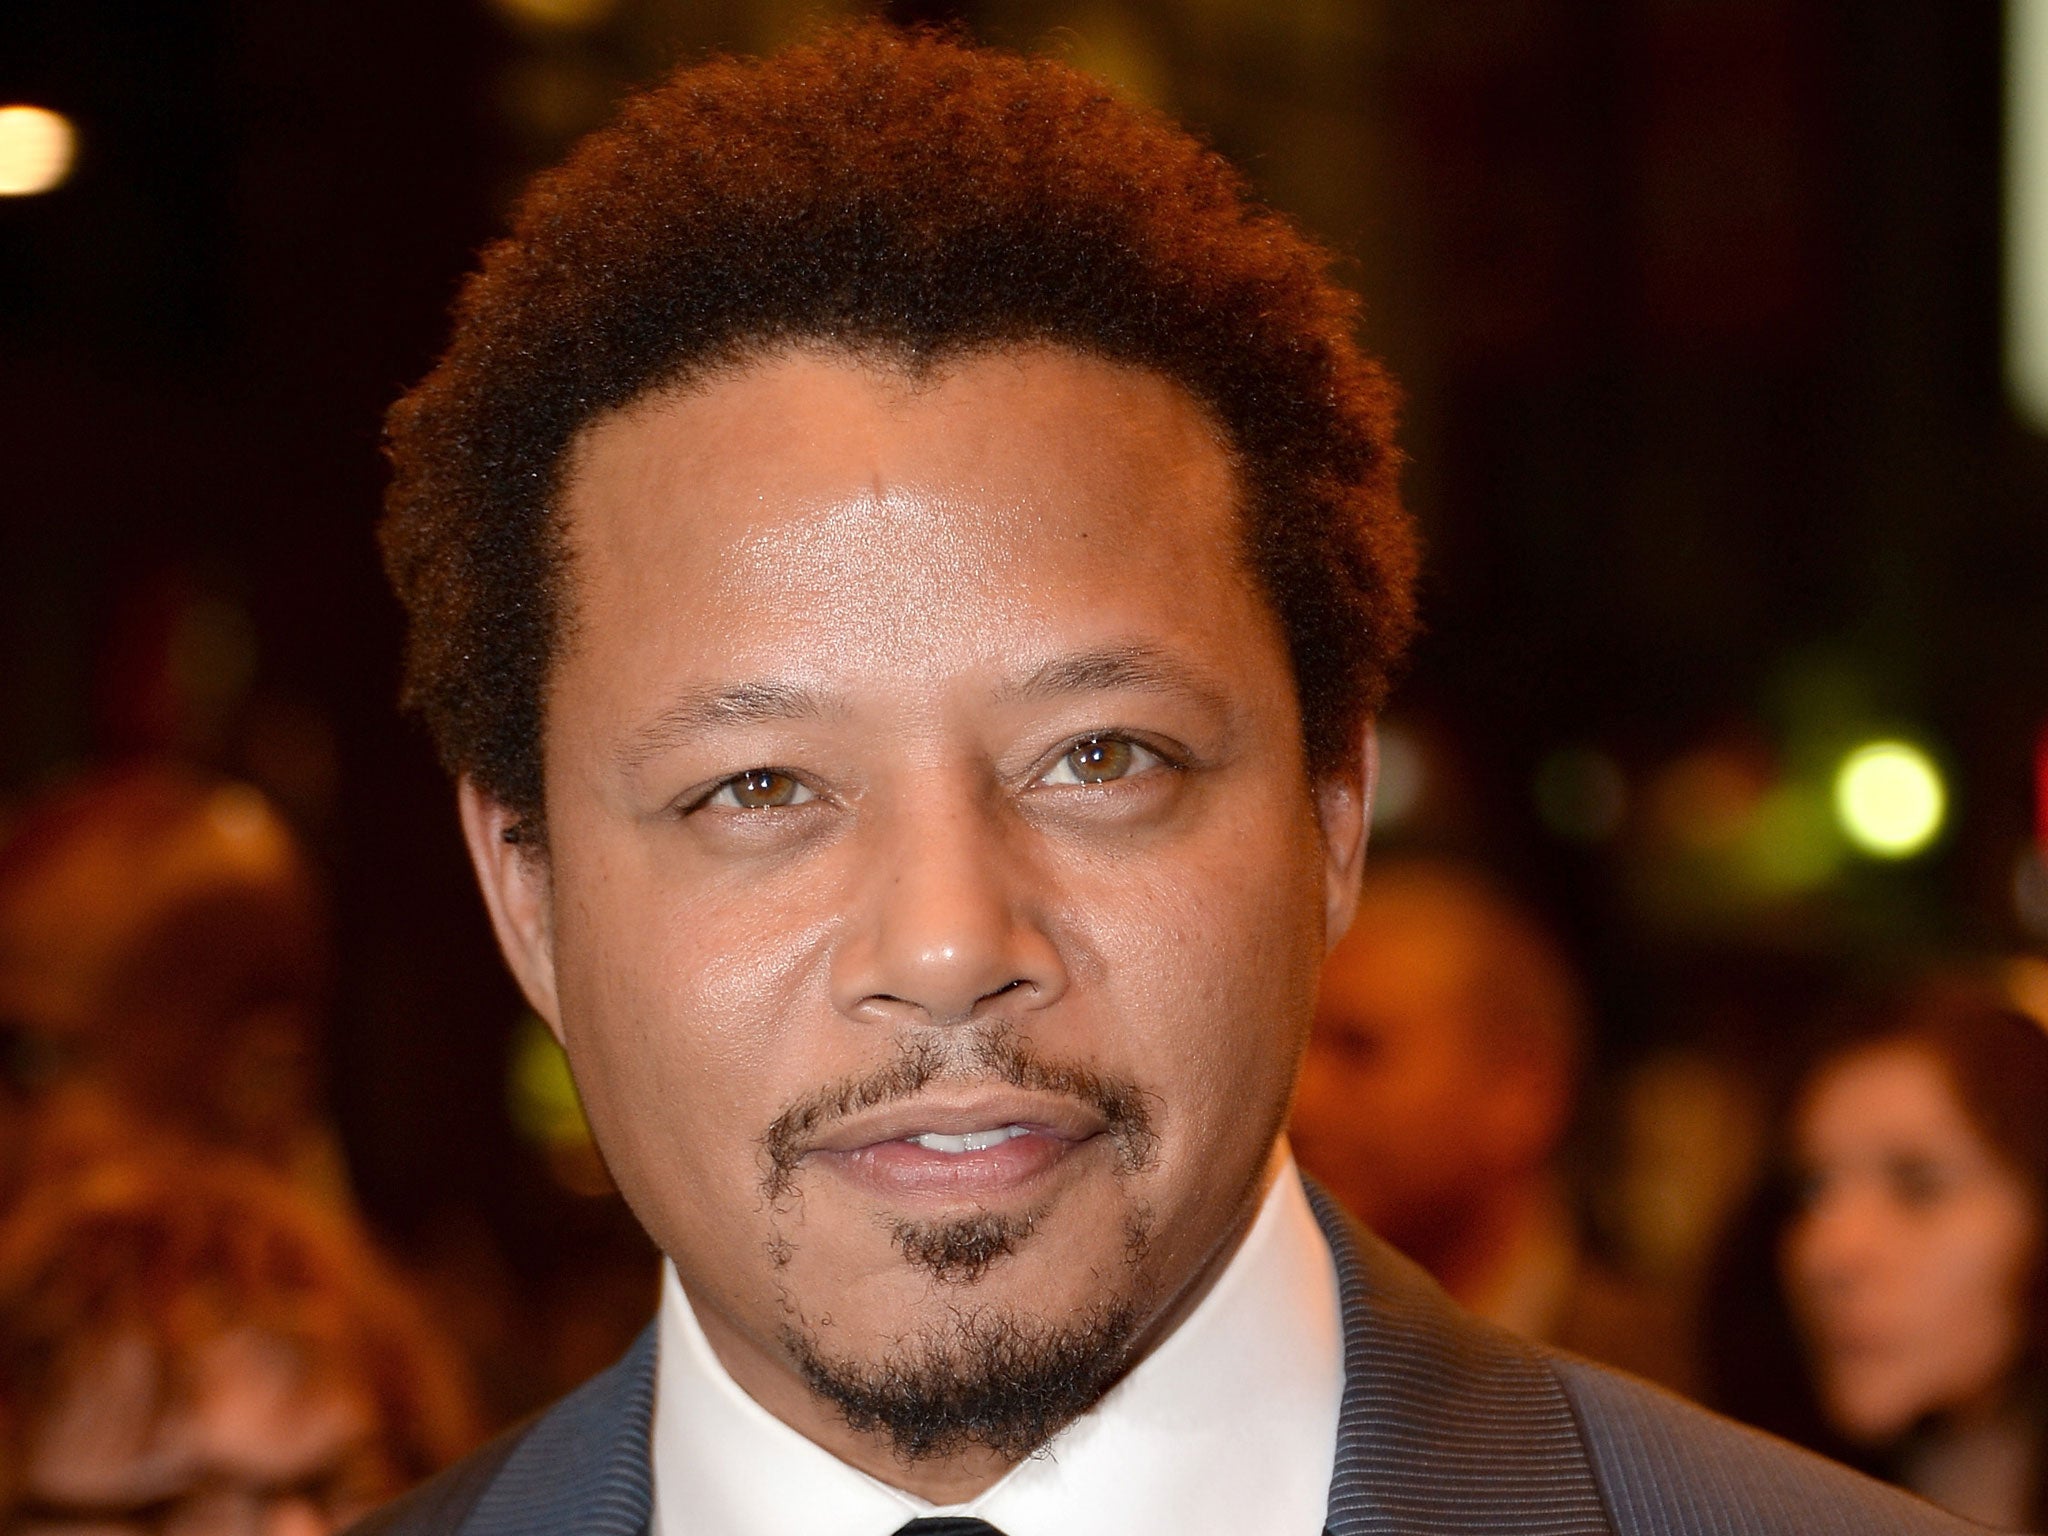 Actor Terrence Howard believes one times one should equal two